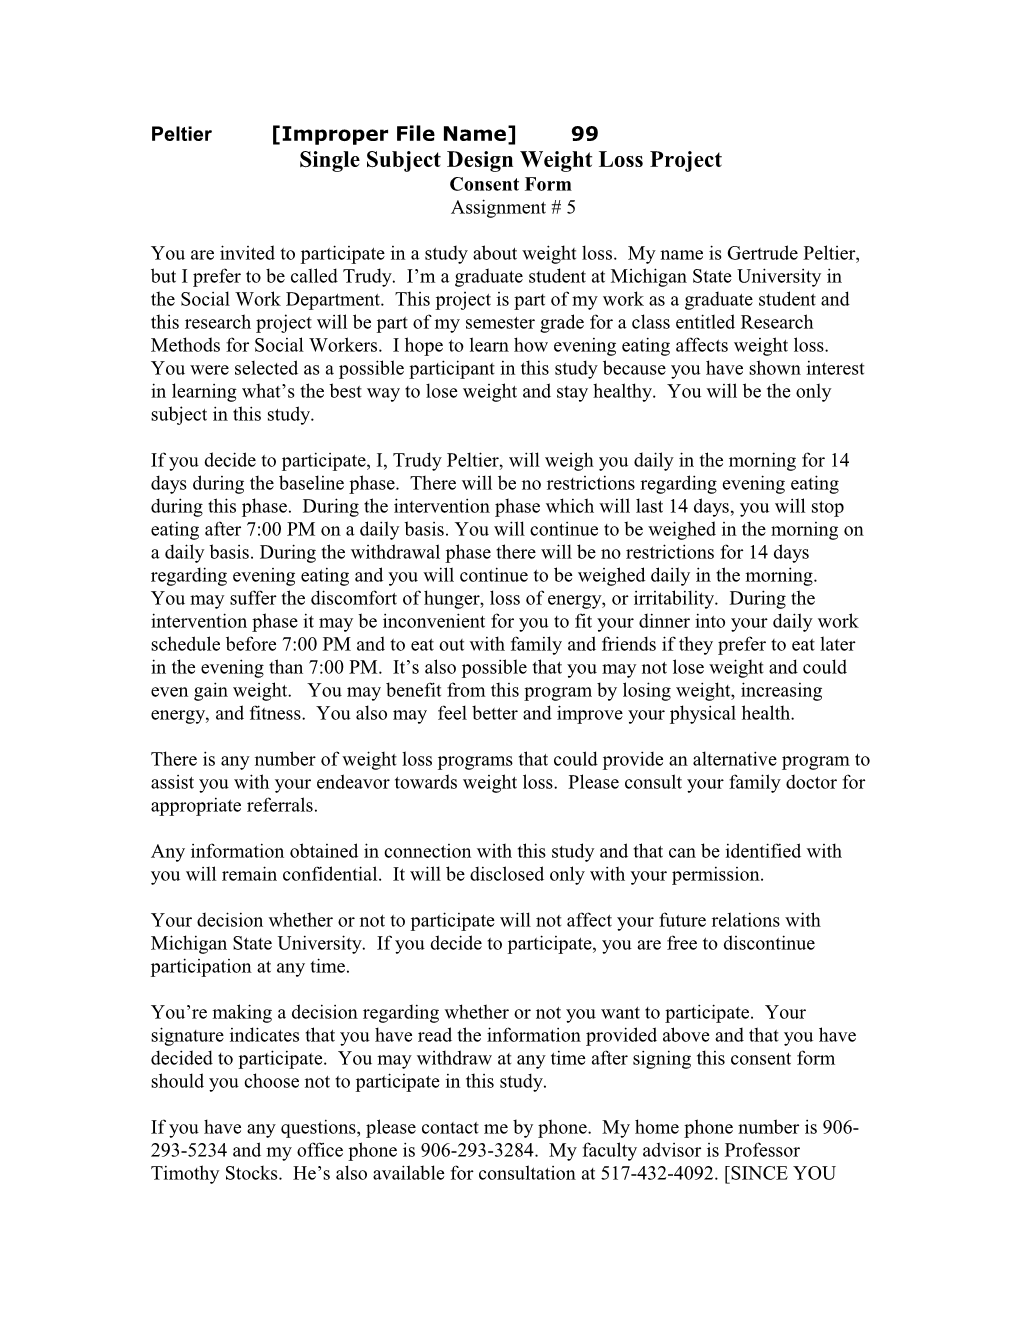 Single Subject Design Weight Loss Project